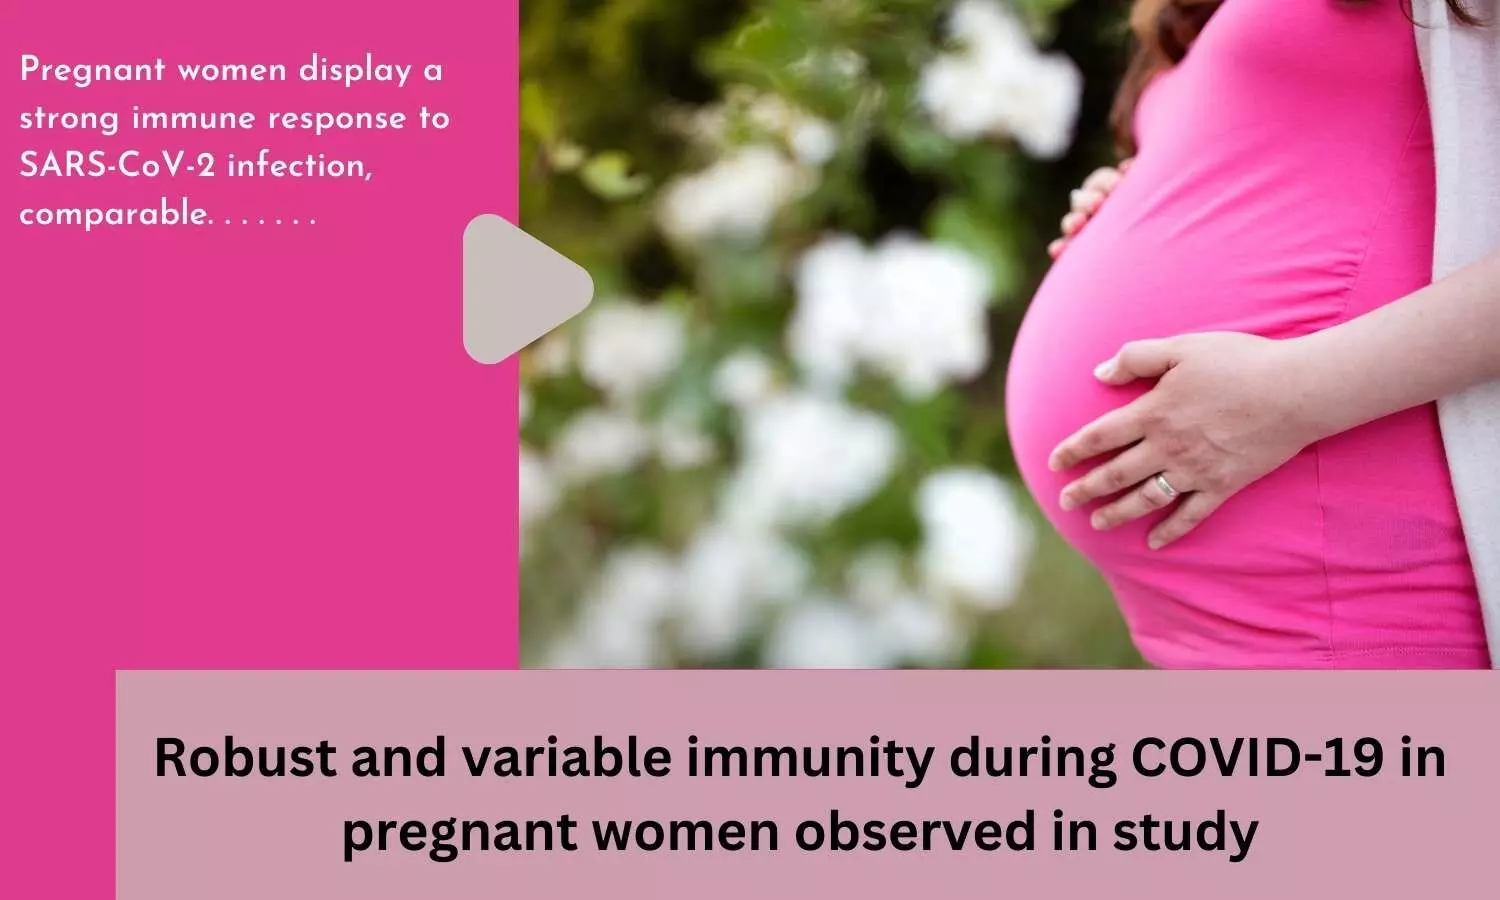 Robust and variable immunity during COVID-19 in pregnant women observed in study